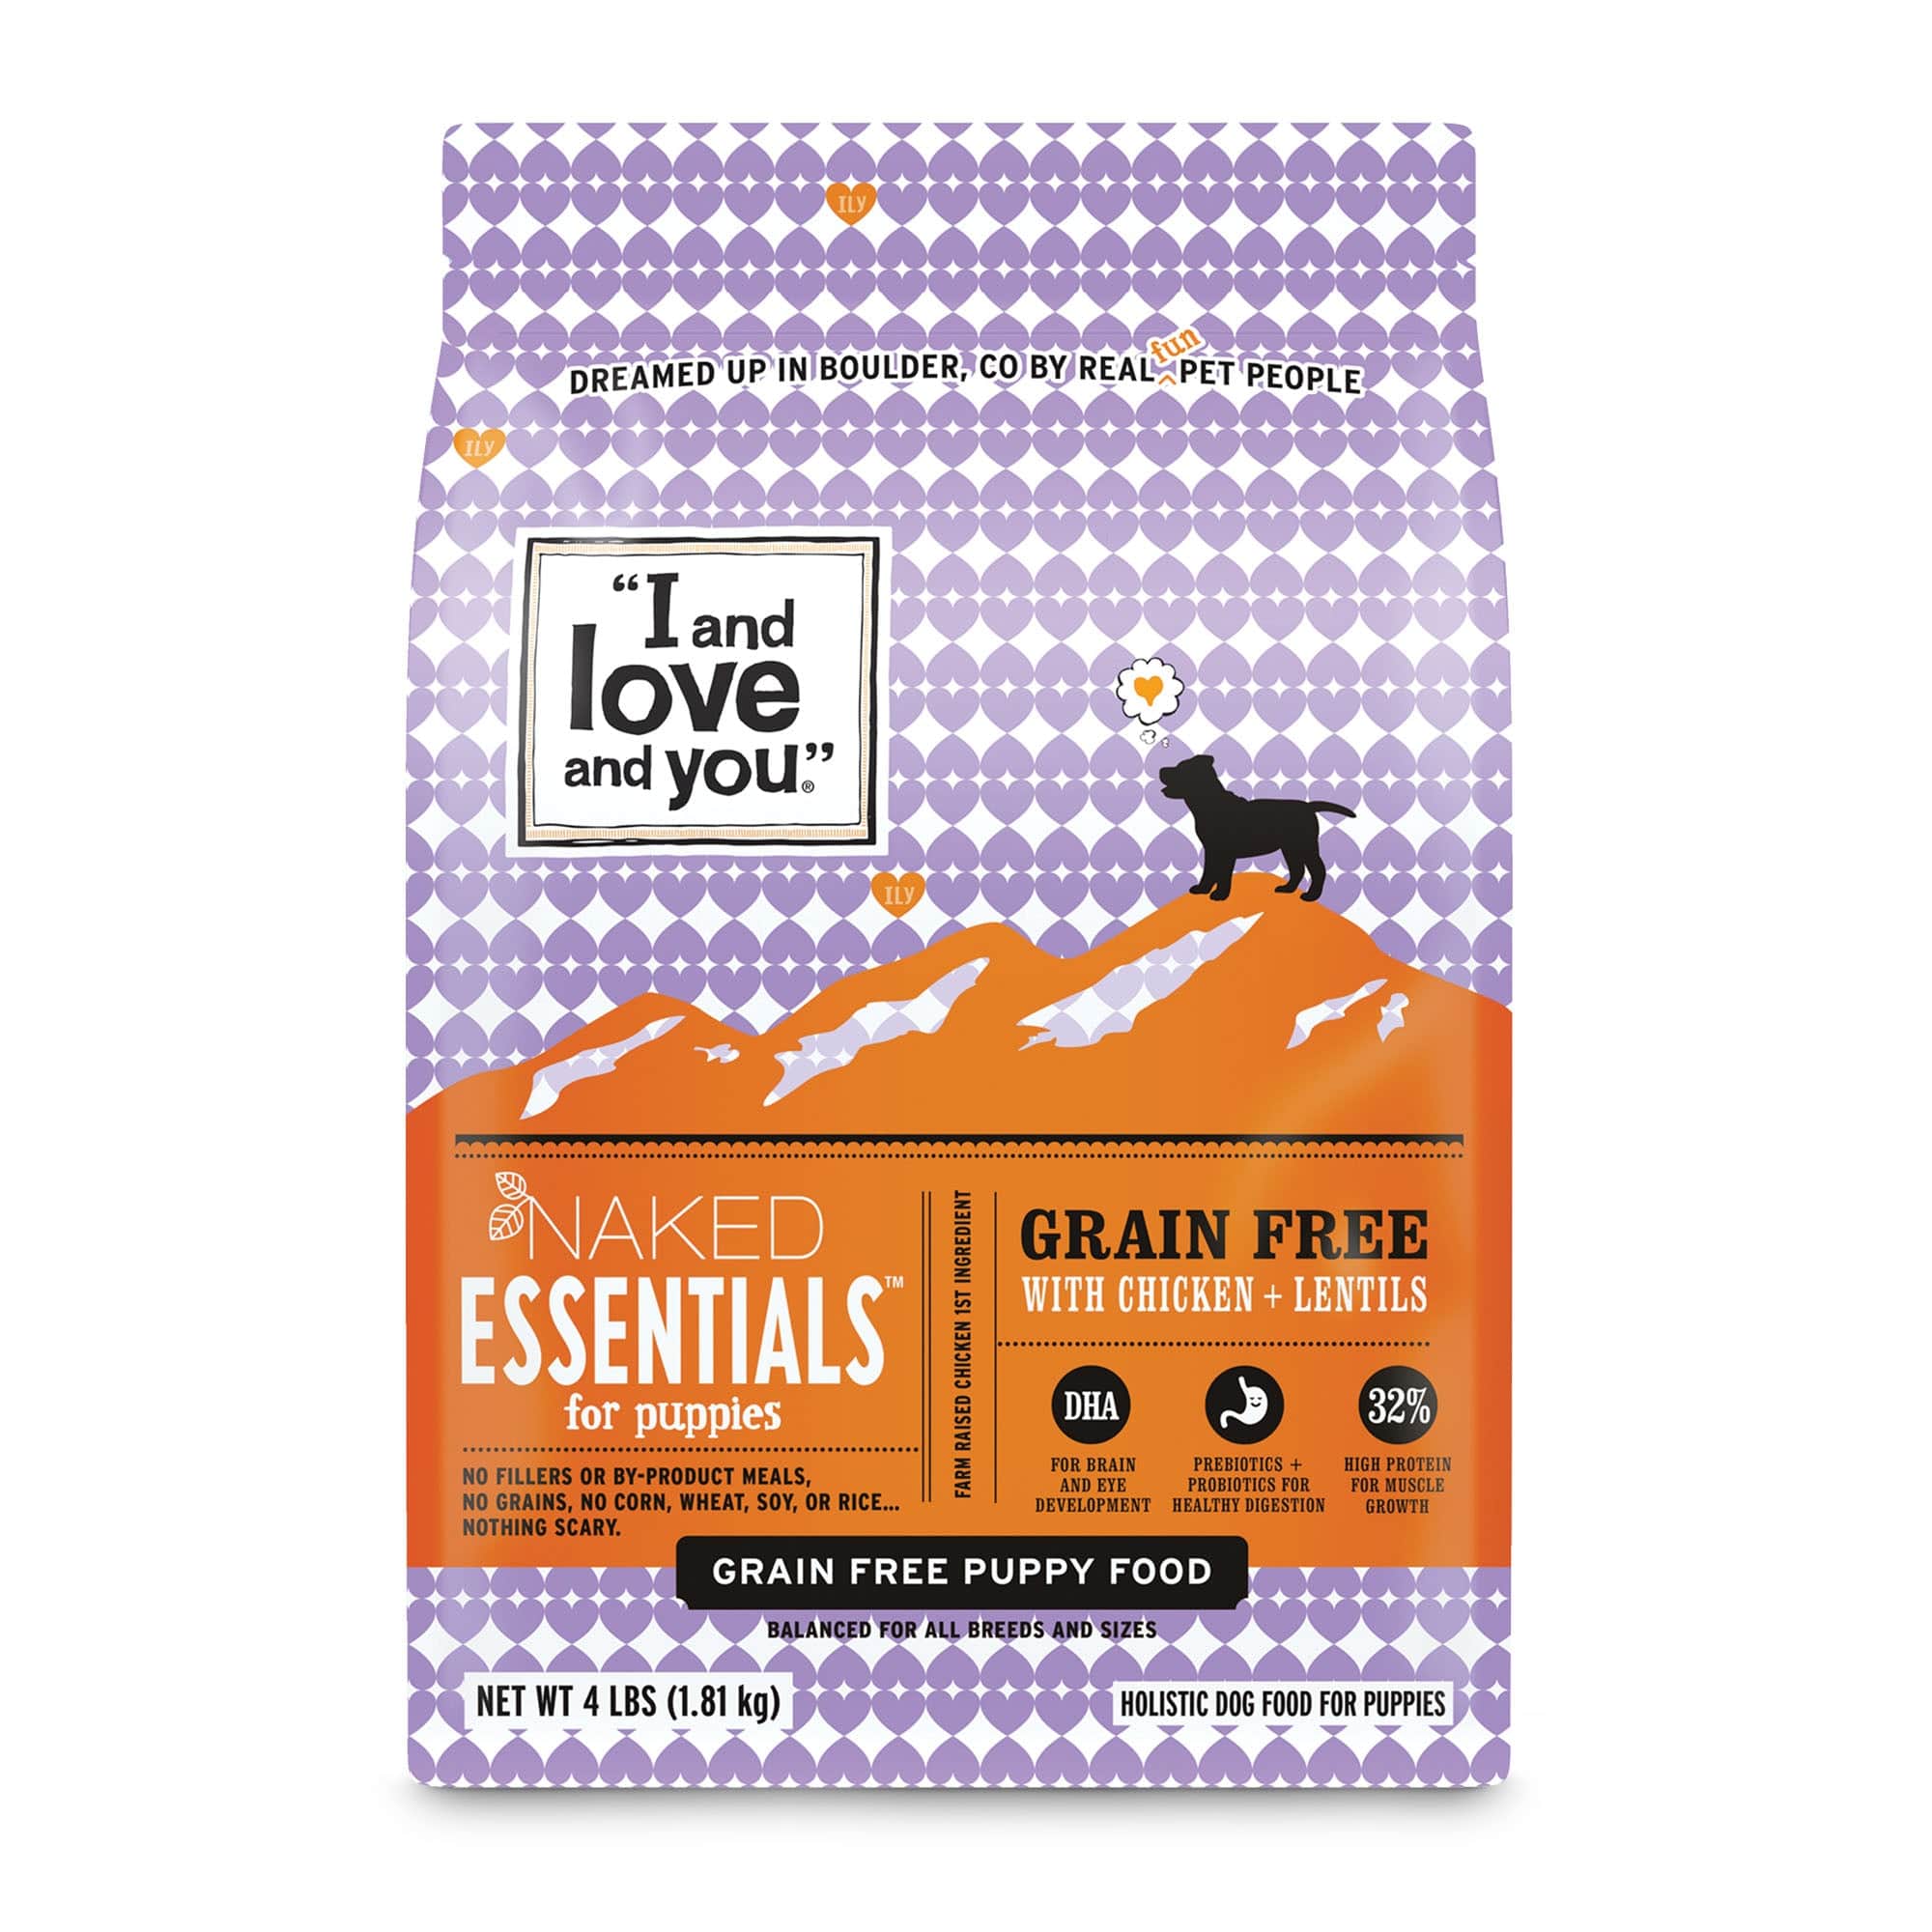 Silhouette of a dog with a bag and package of Naked Essentials Puppy - Chicken + Lentil dog food.